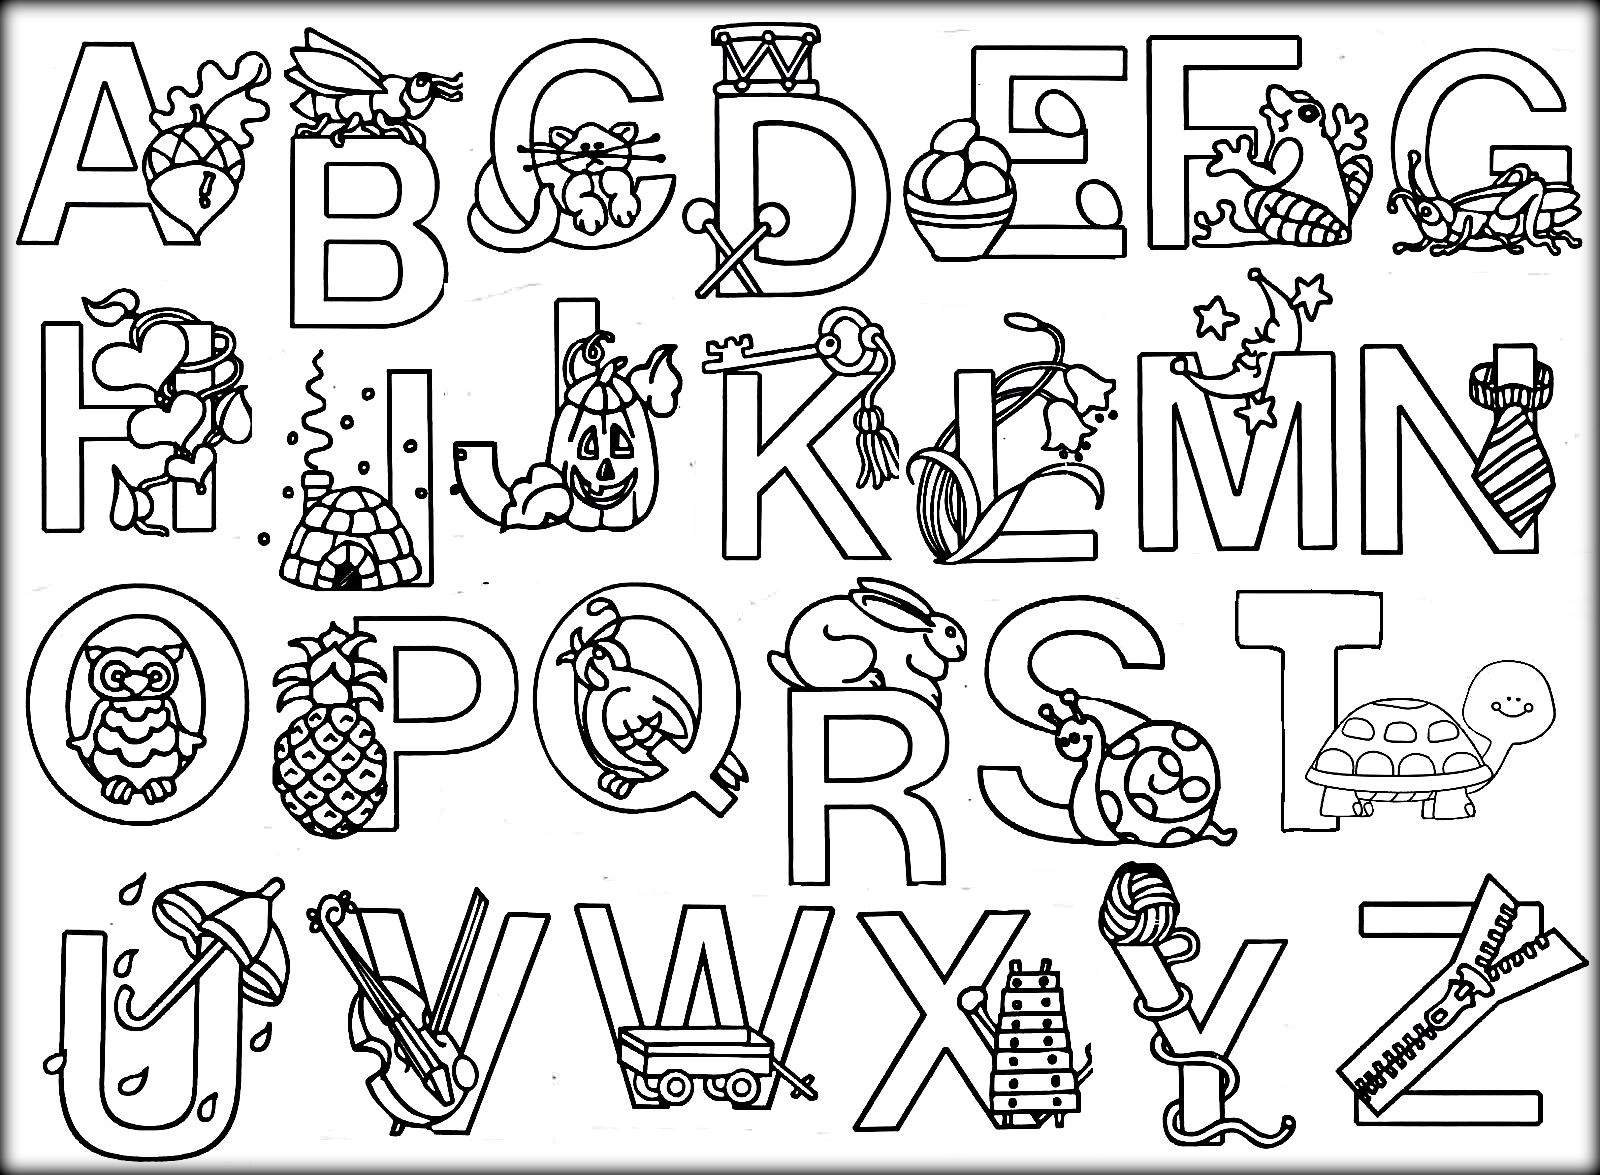 Coloring ~ Coloring Alphabet Book Printable Pdf Pages in Alphabet Coloring Worksheets Pdf